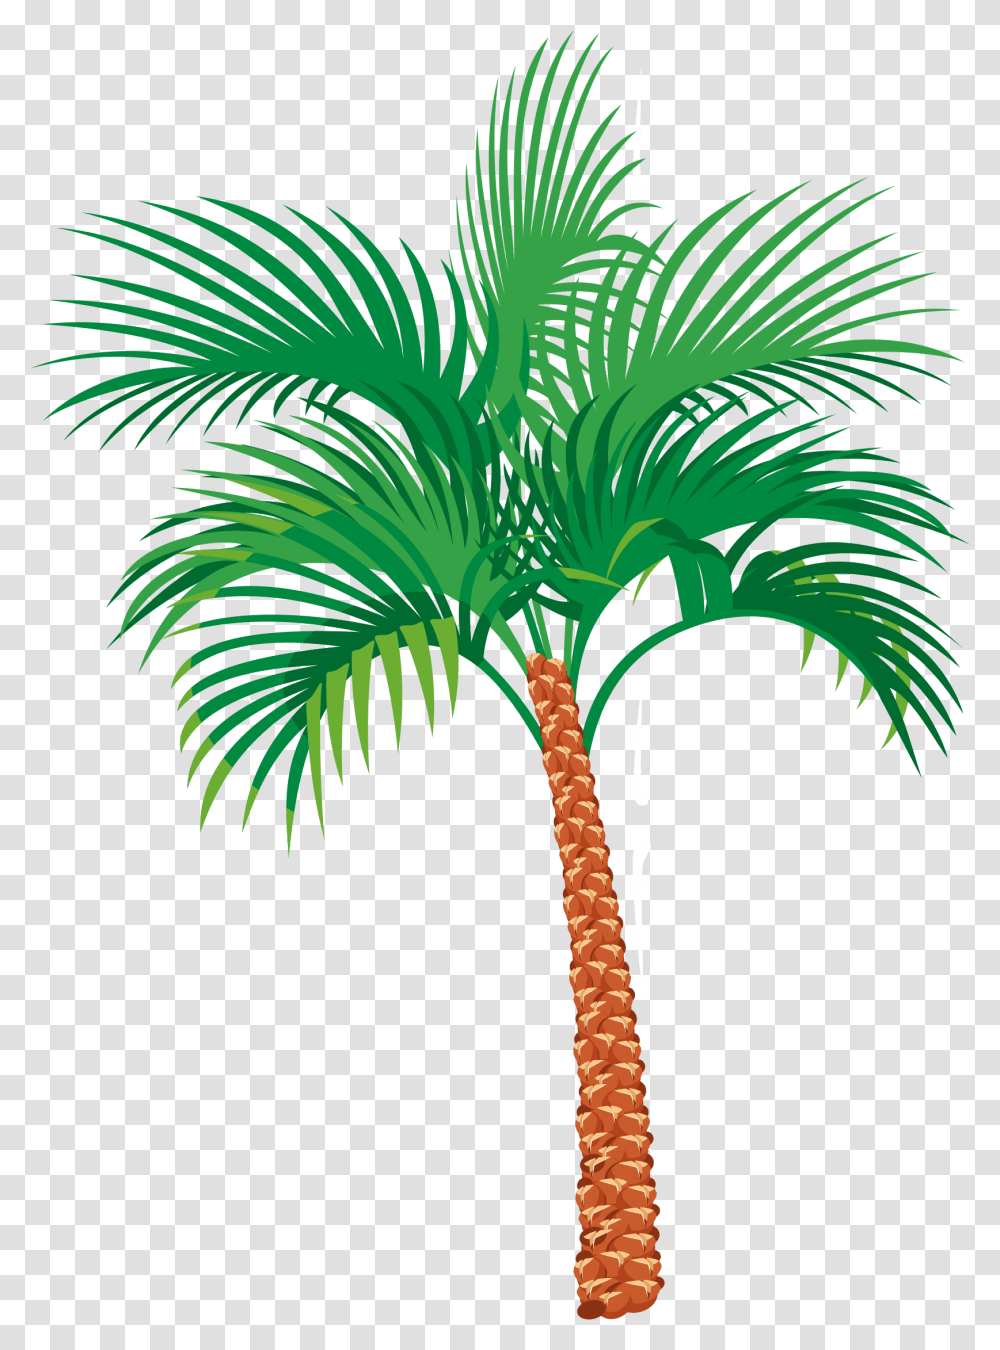 Palm Tree Clipart 32 Image Download Vector Palm Tree Pic Vector, Plant, Arecaceae, Dinosaur, Reptile Transparent Png